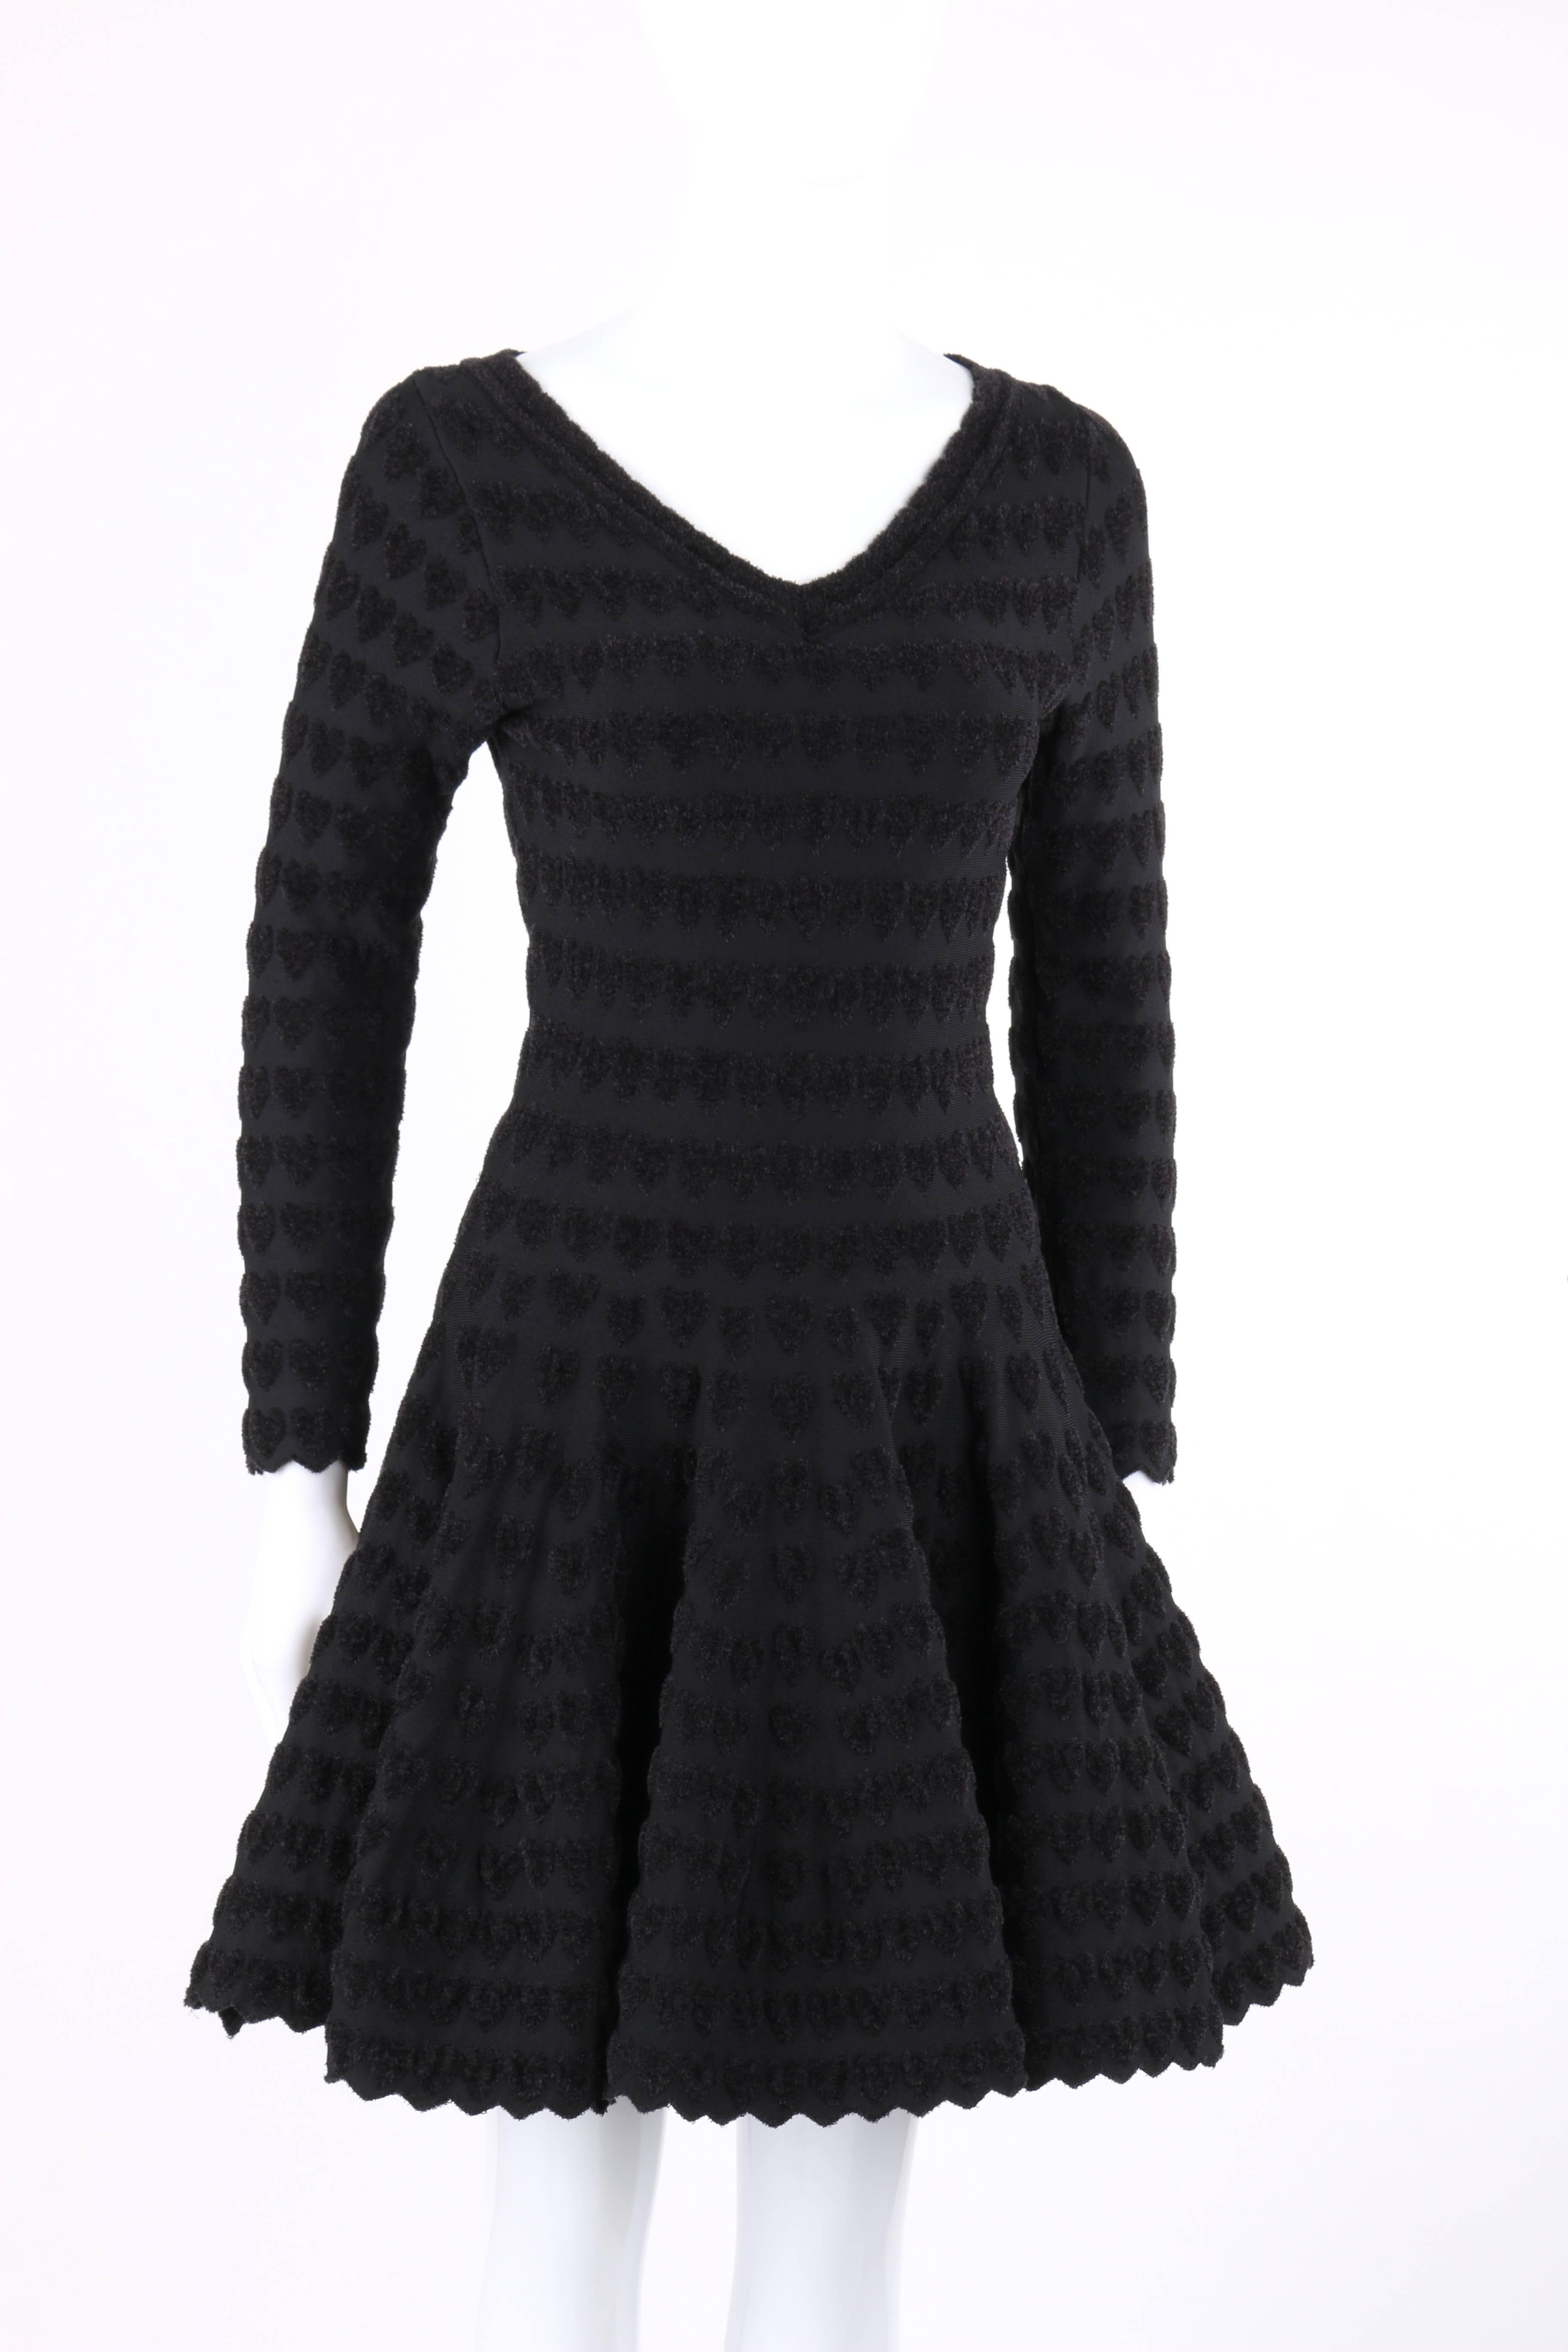 Alaia Paris black heart patterned knit cocktail dress. Black on black plush heart patterned knit. V-neckline. Long sleeves. Drop waist. Full skirt. Zigzag hem at cuffs and hemline. Slip-on. Fit and flare style. Unlined. Unmarked Fabric Content: